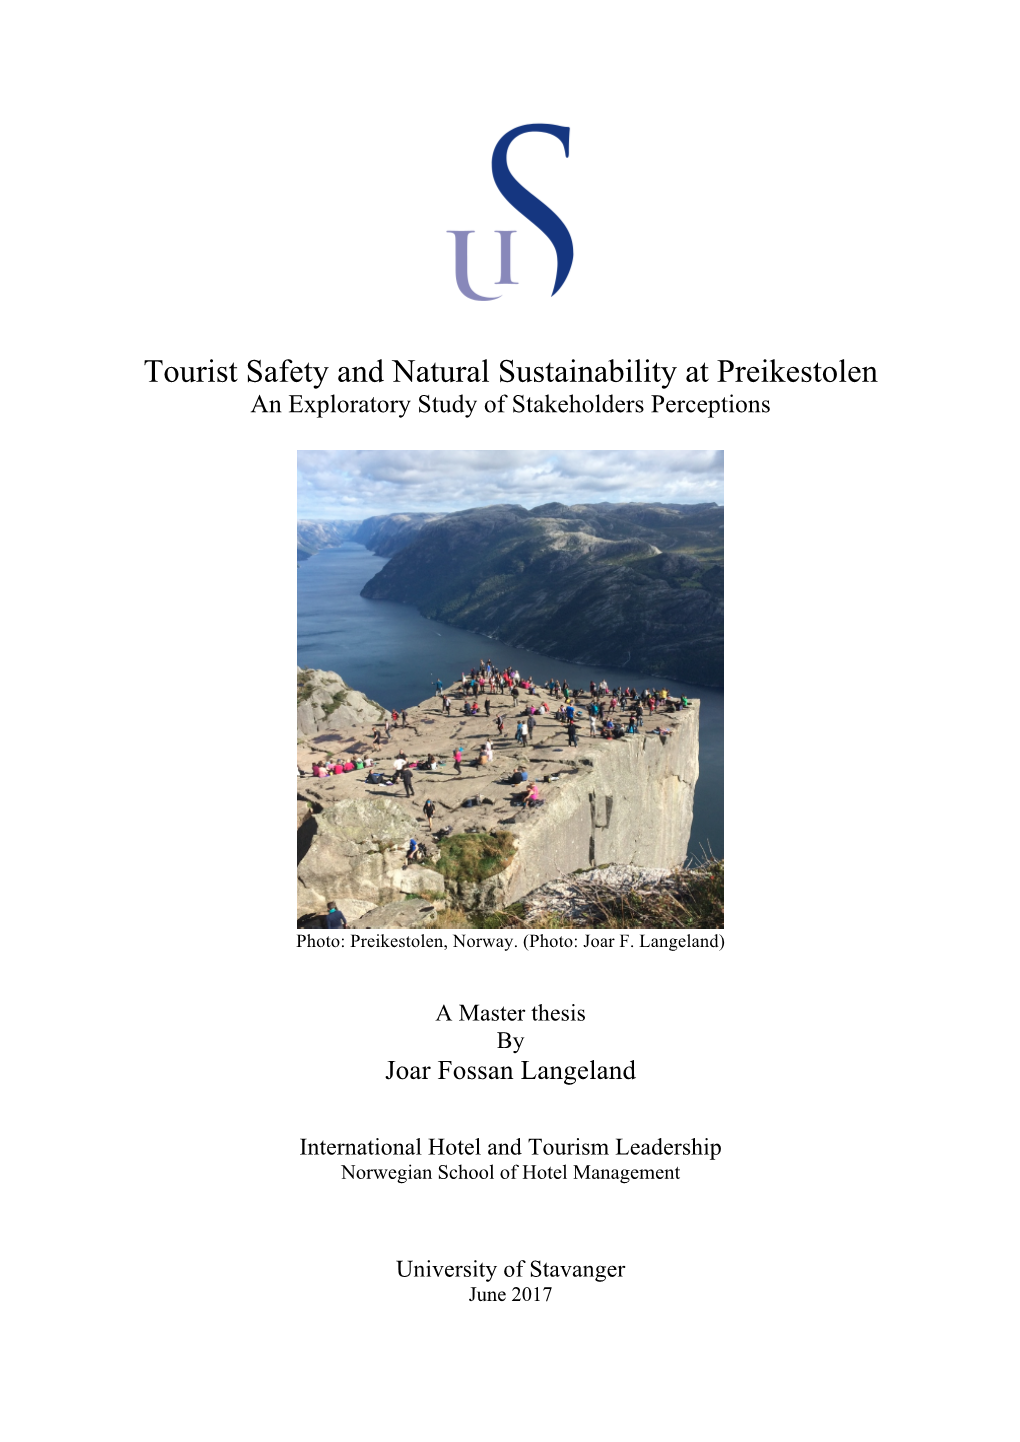 Tourist Safety and Natural Sustainability at Preikestolen an Exploratory Study of Stakeholders Perceptions